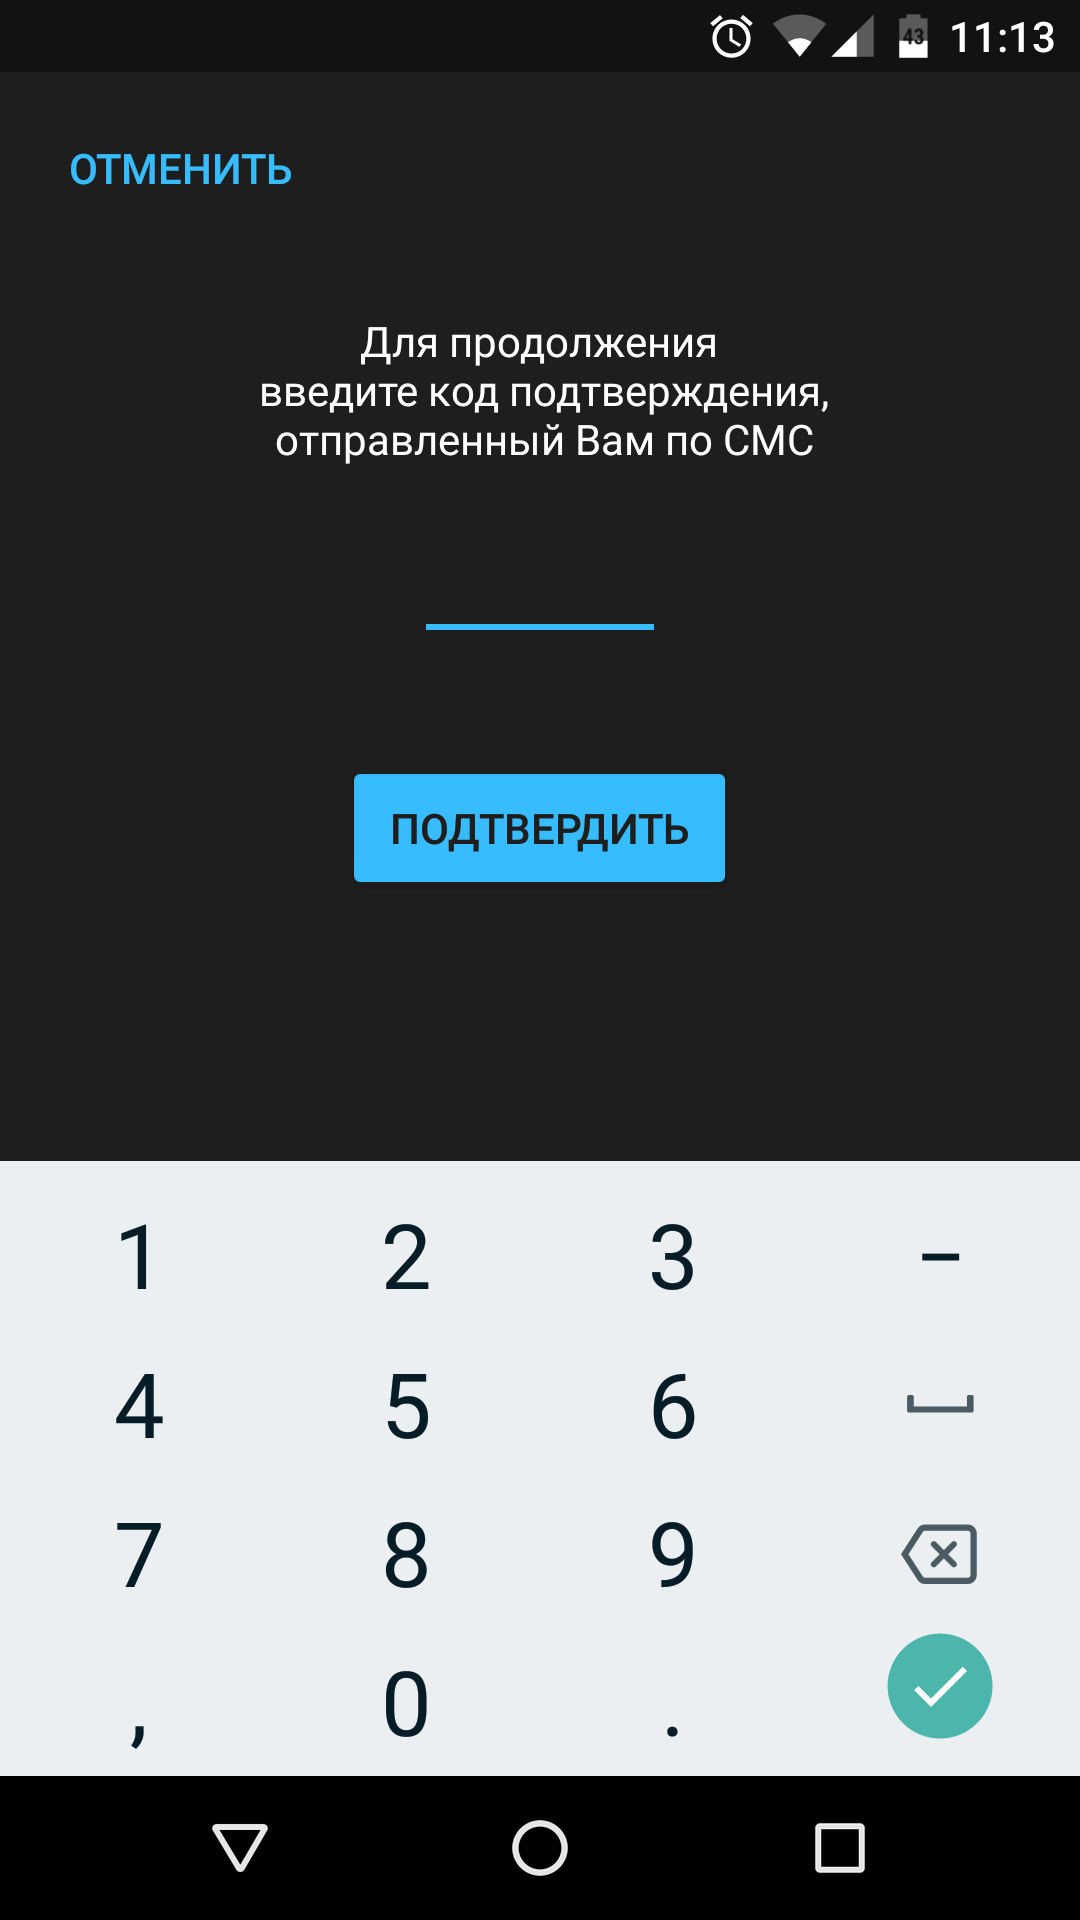 quik_android_x_login_window_02.png